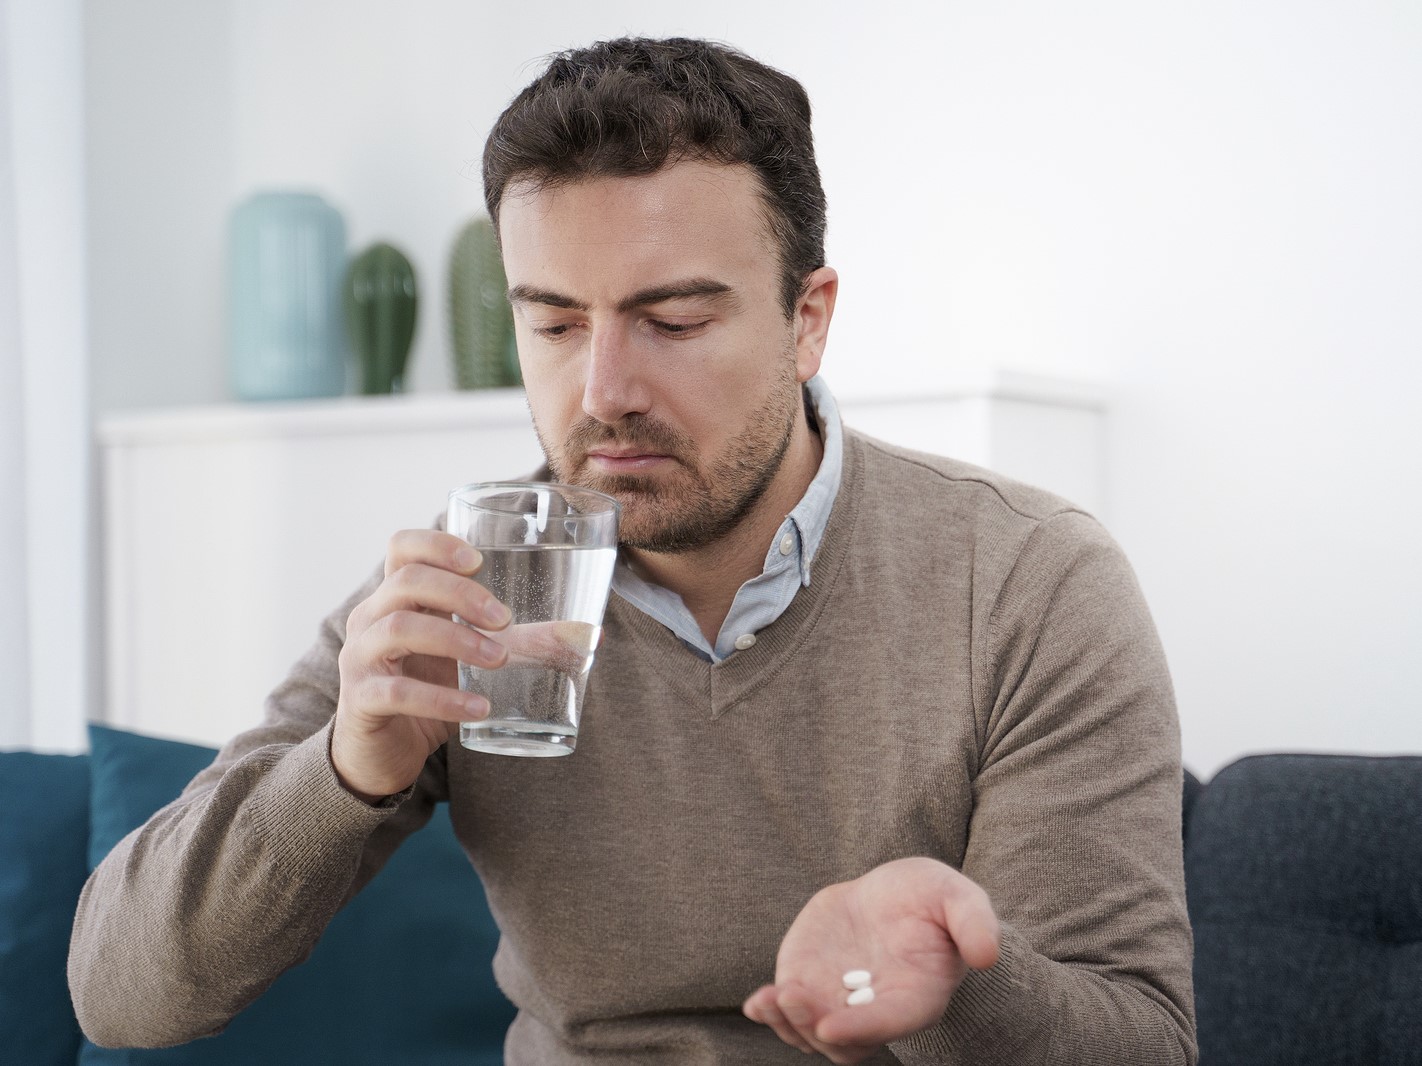 A man holding two gabapentin pills on his palm and a glass of water on the other hand